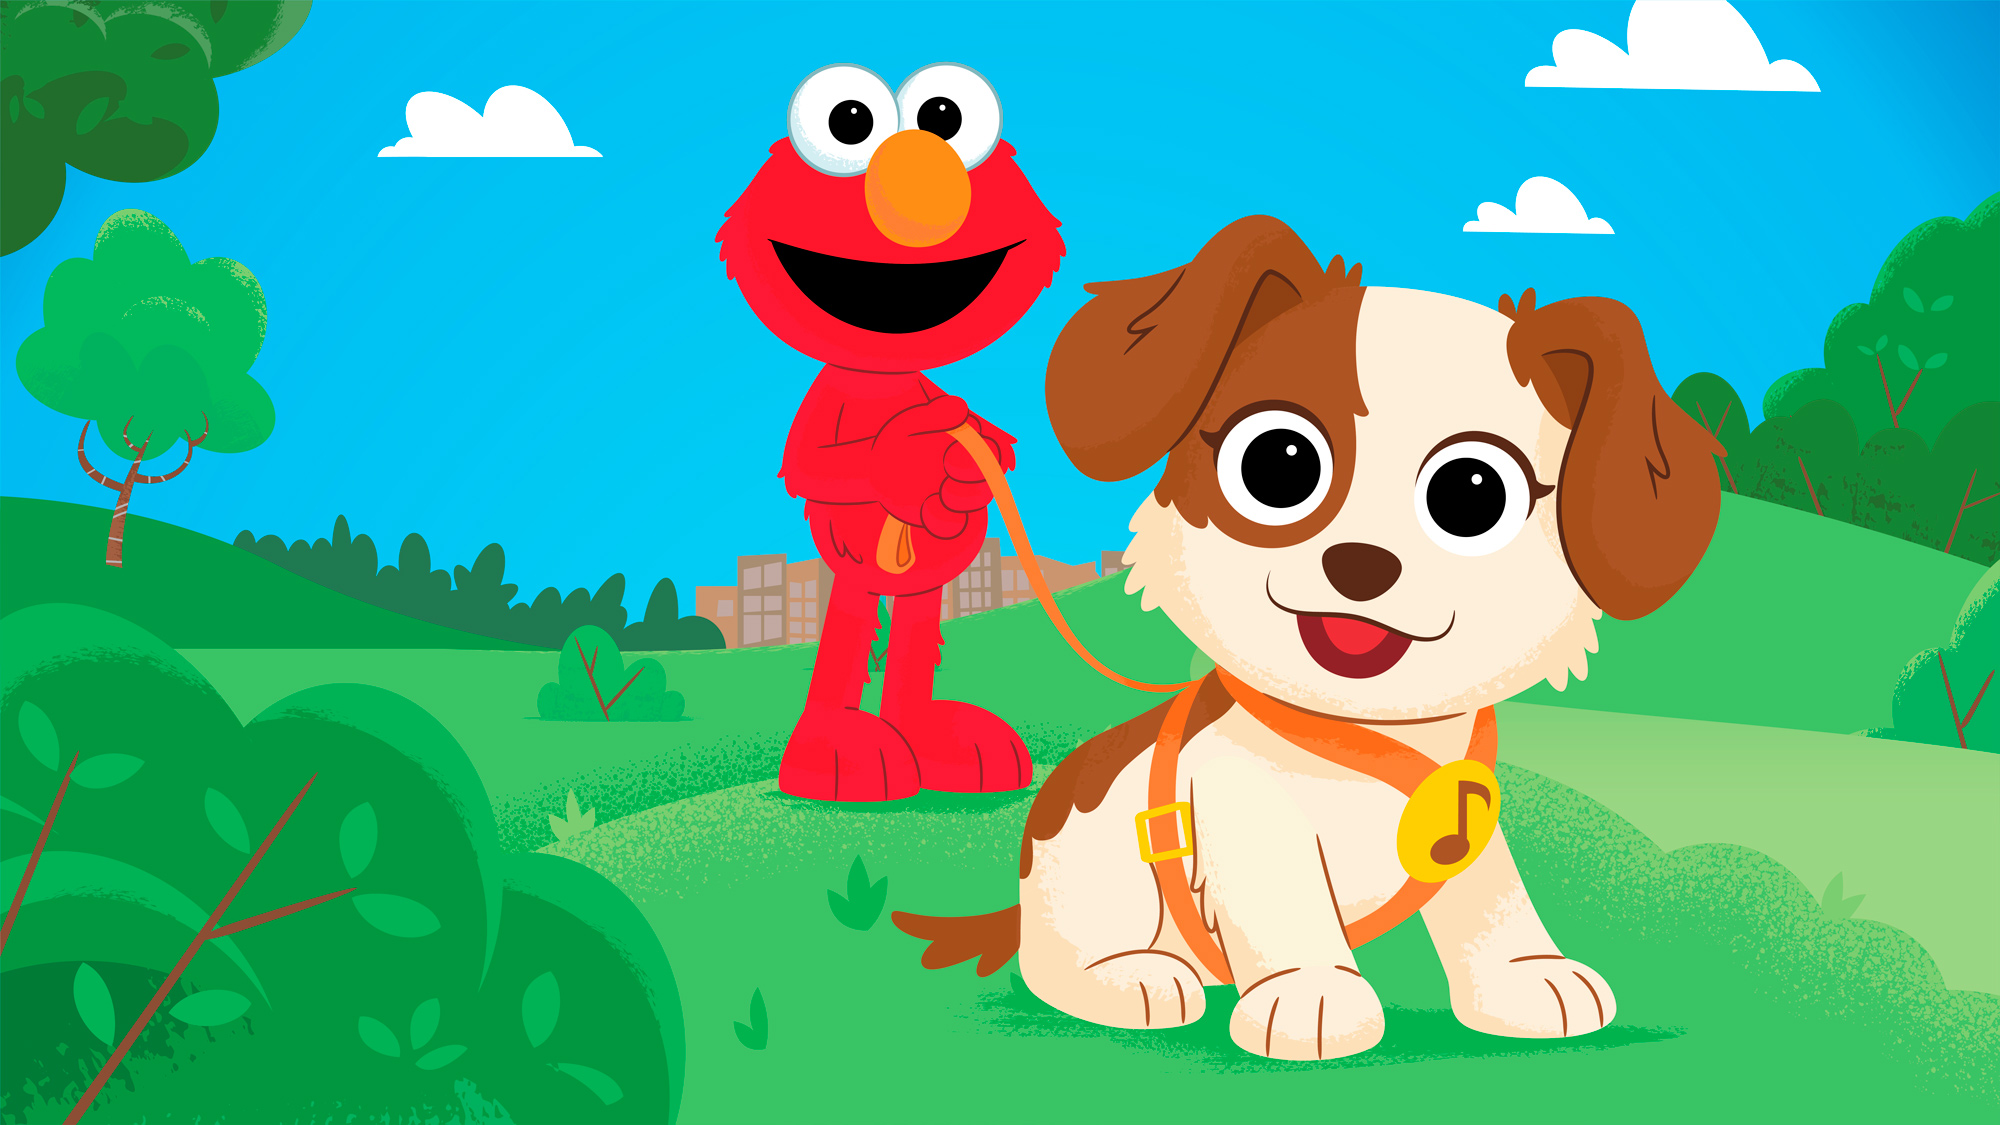 This image released by Sesame Workshop shows characters Elmo and Tango in a scene from the new special “Furry Friends Forever: Elmo Gets a Puppy,” debuting on HBO Max on Aug. 5. (Sesame Workshop via AP) Sesame Workshop